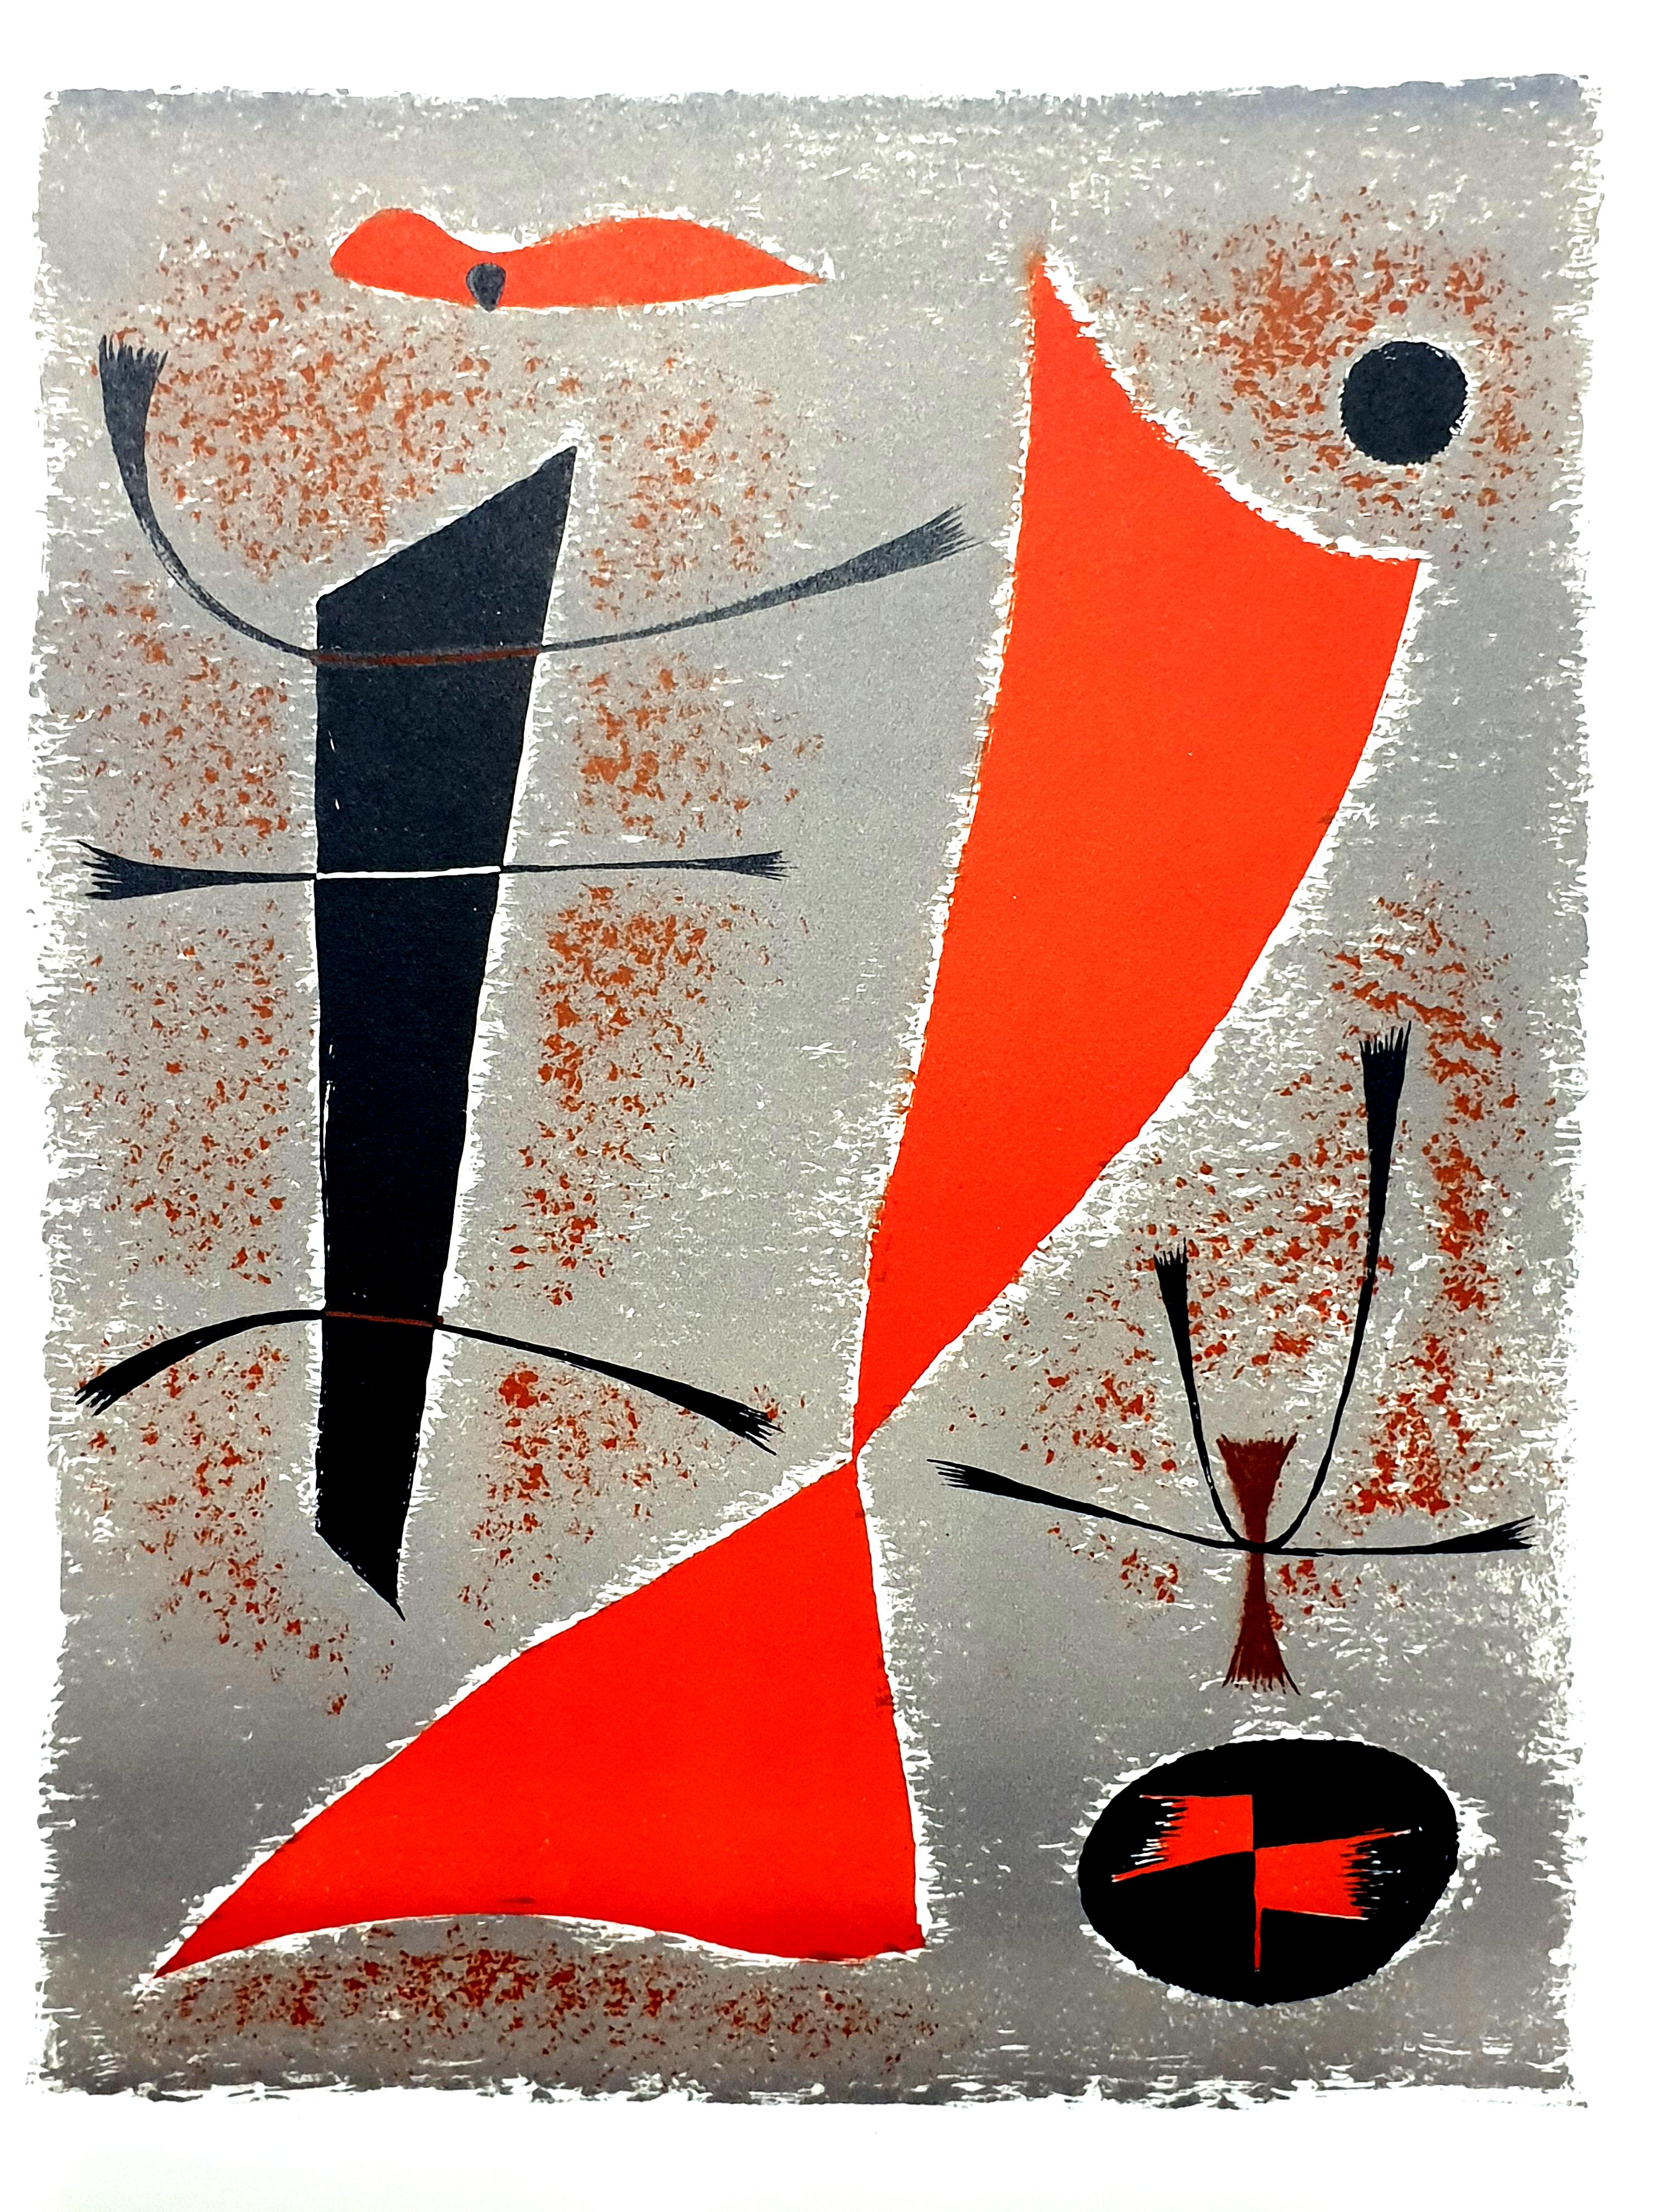 Gustave Singier - Abstract Fish - Original Lithograph
Conditions: excellent
32 x 24 cm
1955
From XXe siècle, San Lazzaro
Unsigned and unumbered as issued